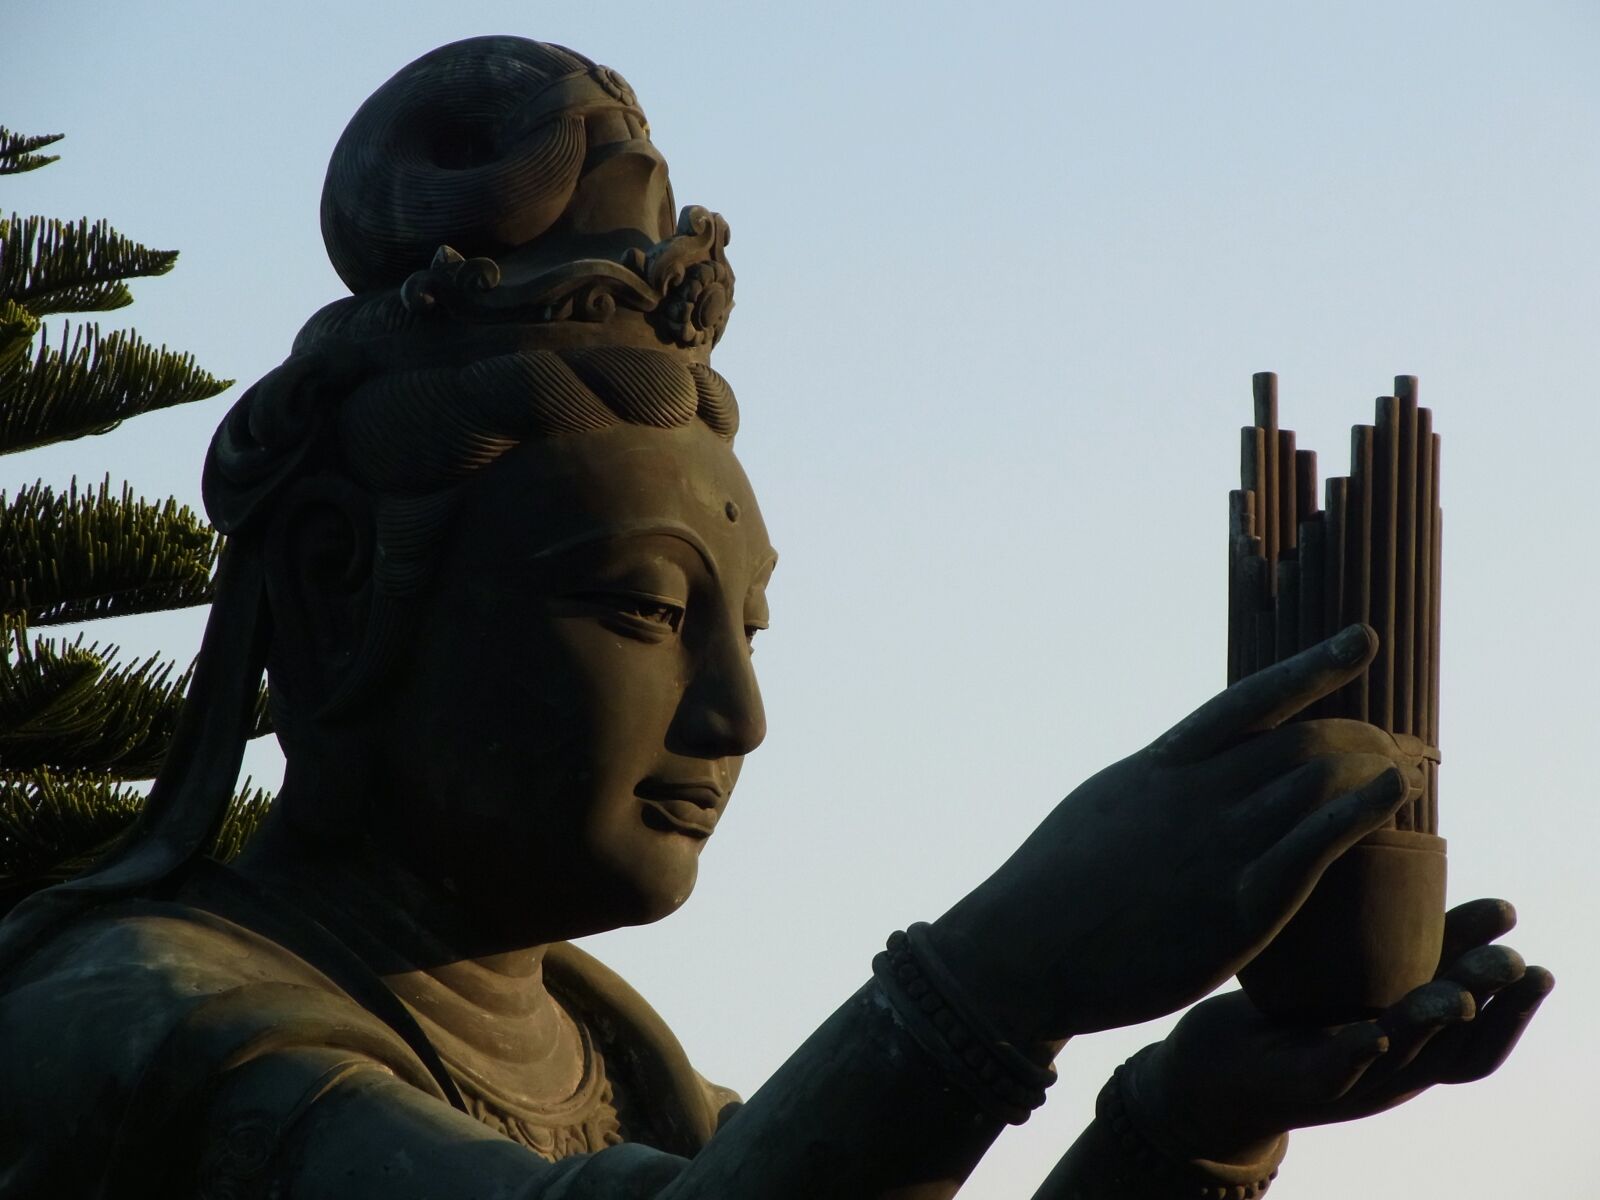 RICOH ZOOM LENS sample photo. Statue, guanyin, buddhism photography